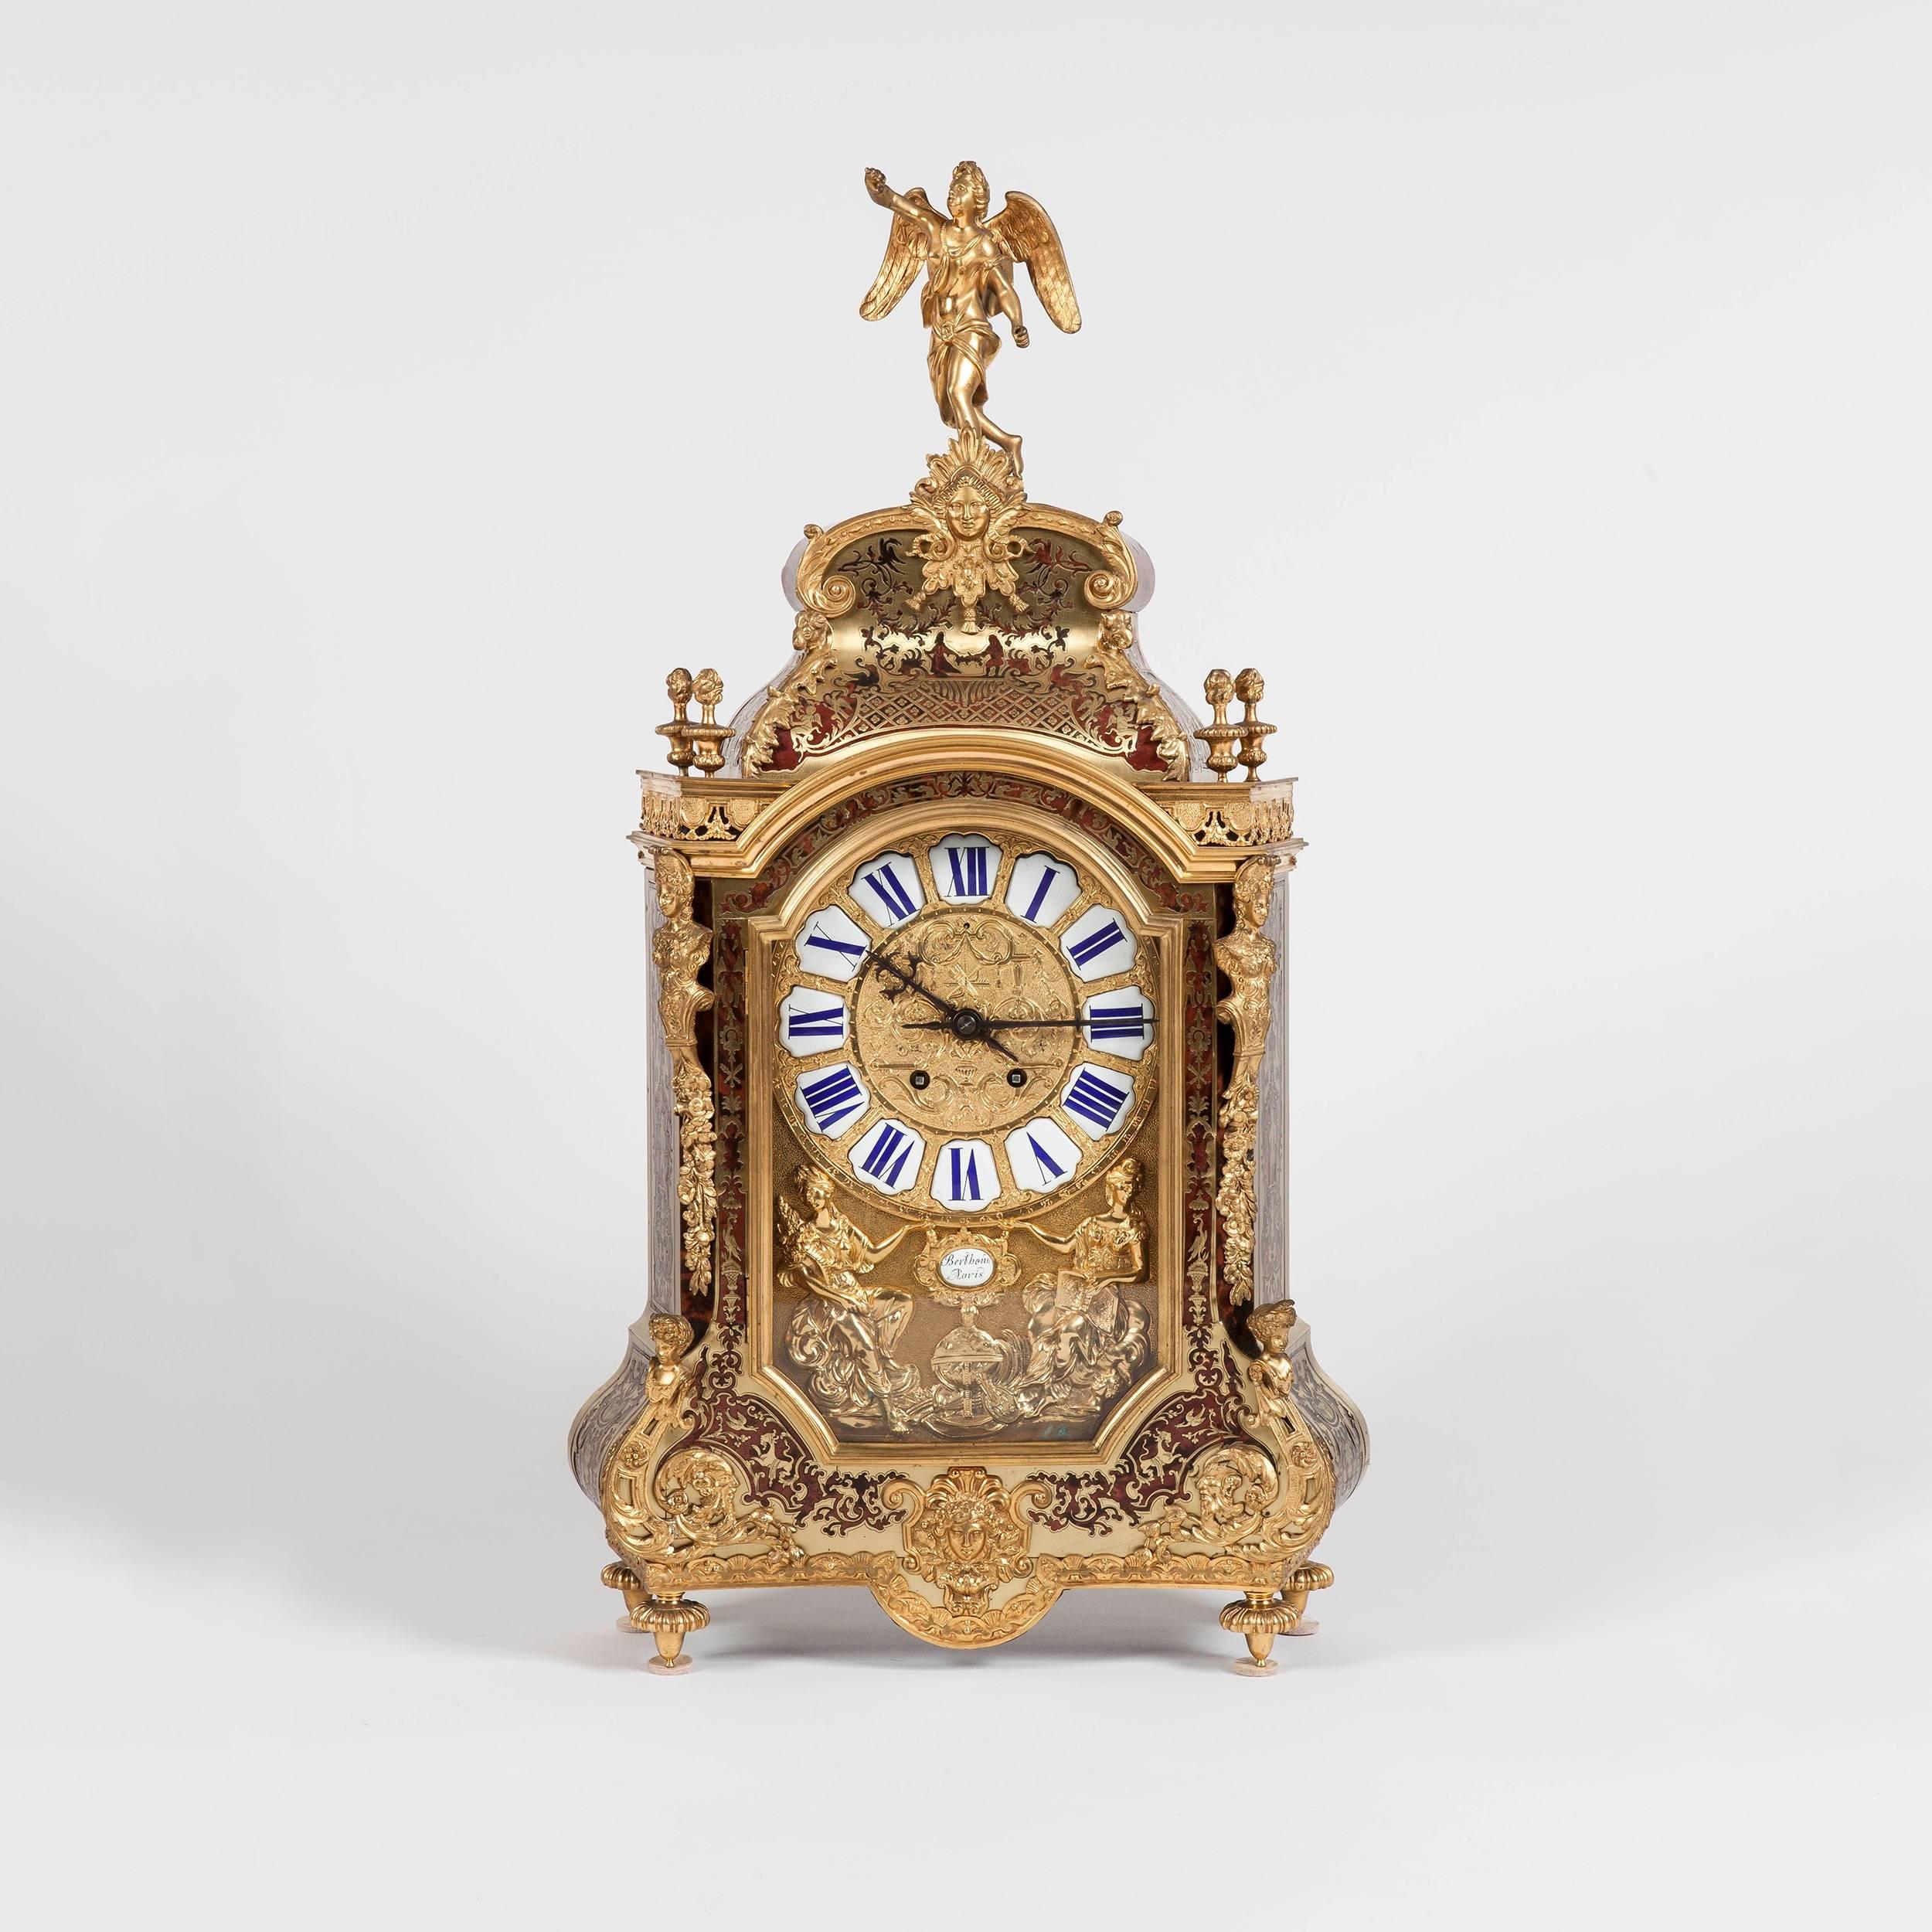 A French second empire bracket clock by Berthoud of Paris 
In the manner of Andre-Charles Boulle

Constructed in tortoiseshell and brass in premiere-partie Boulle work, the decoration drawing inspiration from Jean Berain, and adorned with bronze